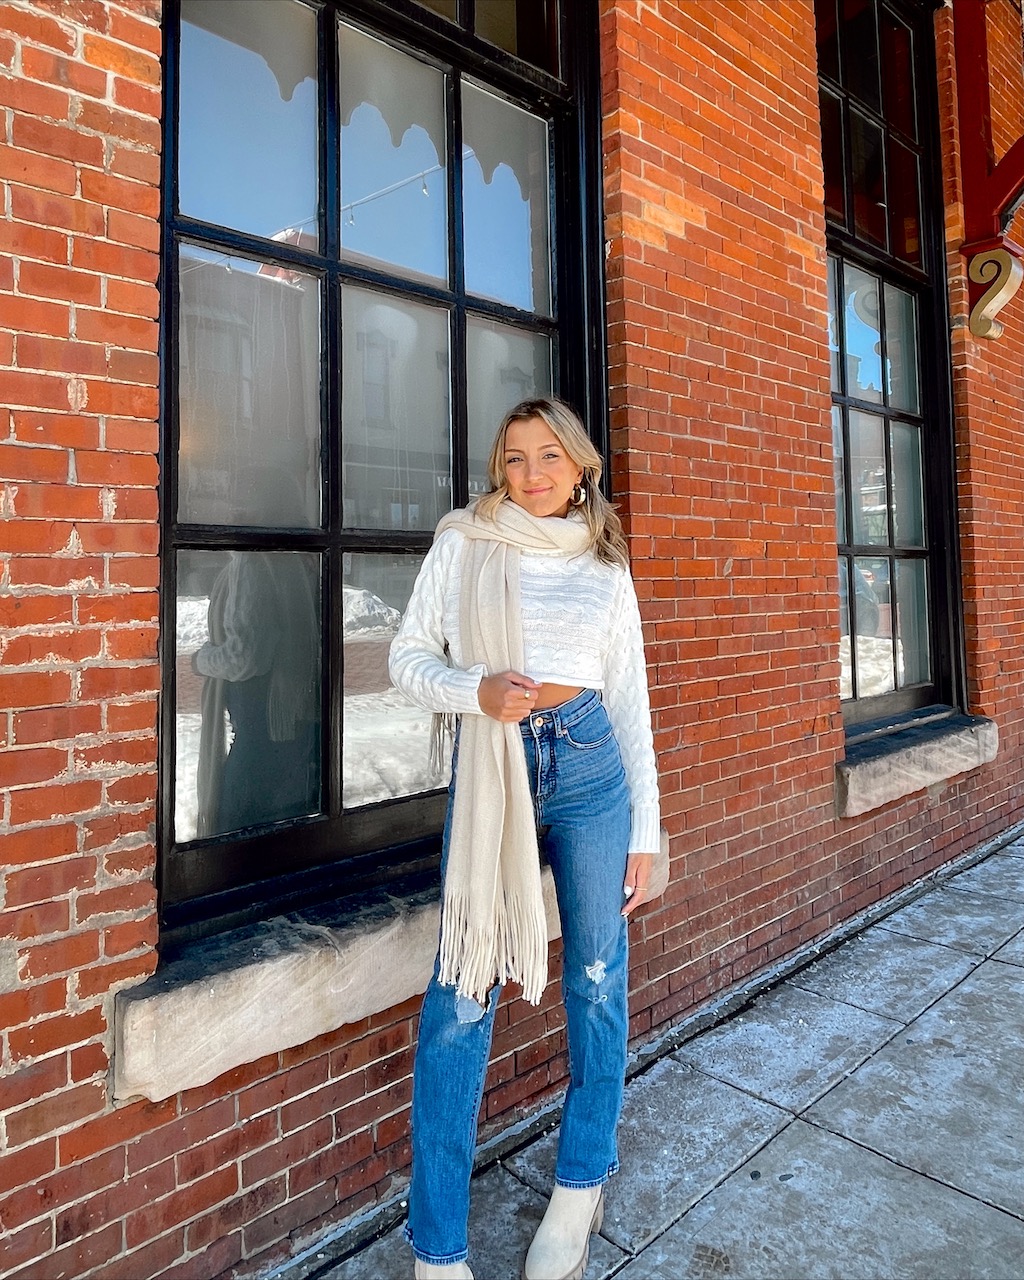 Styling My Top Three Most Worn Jeans